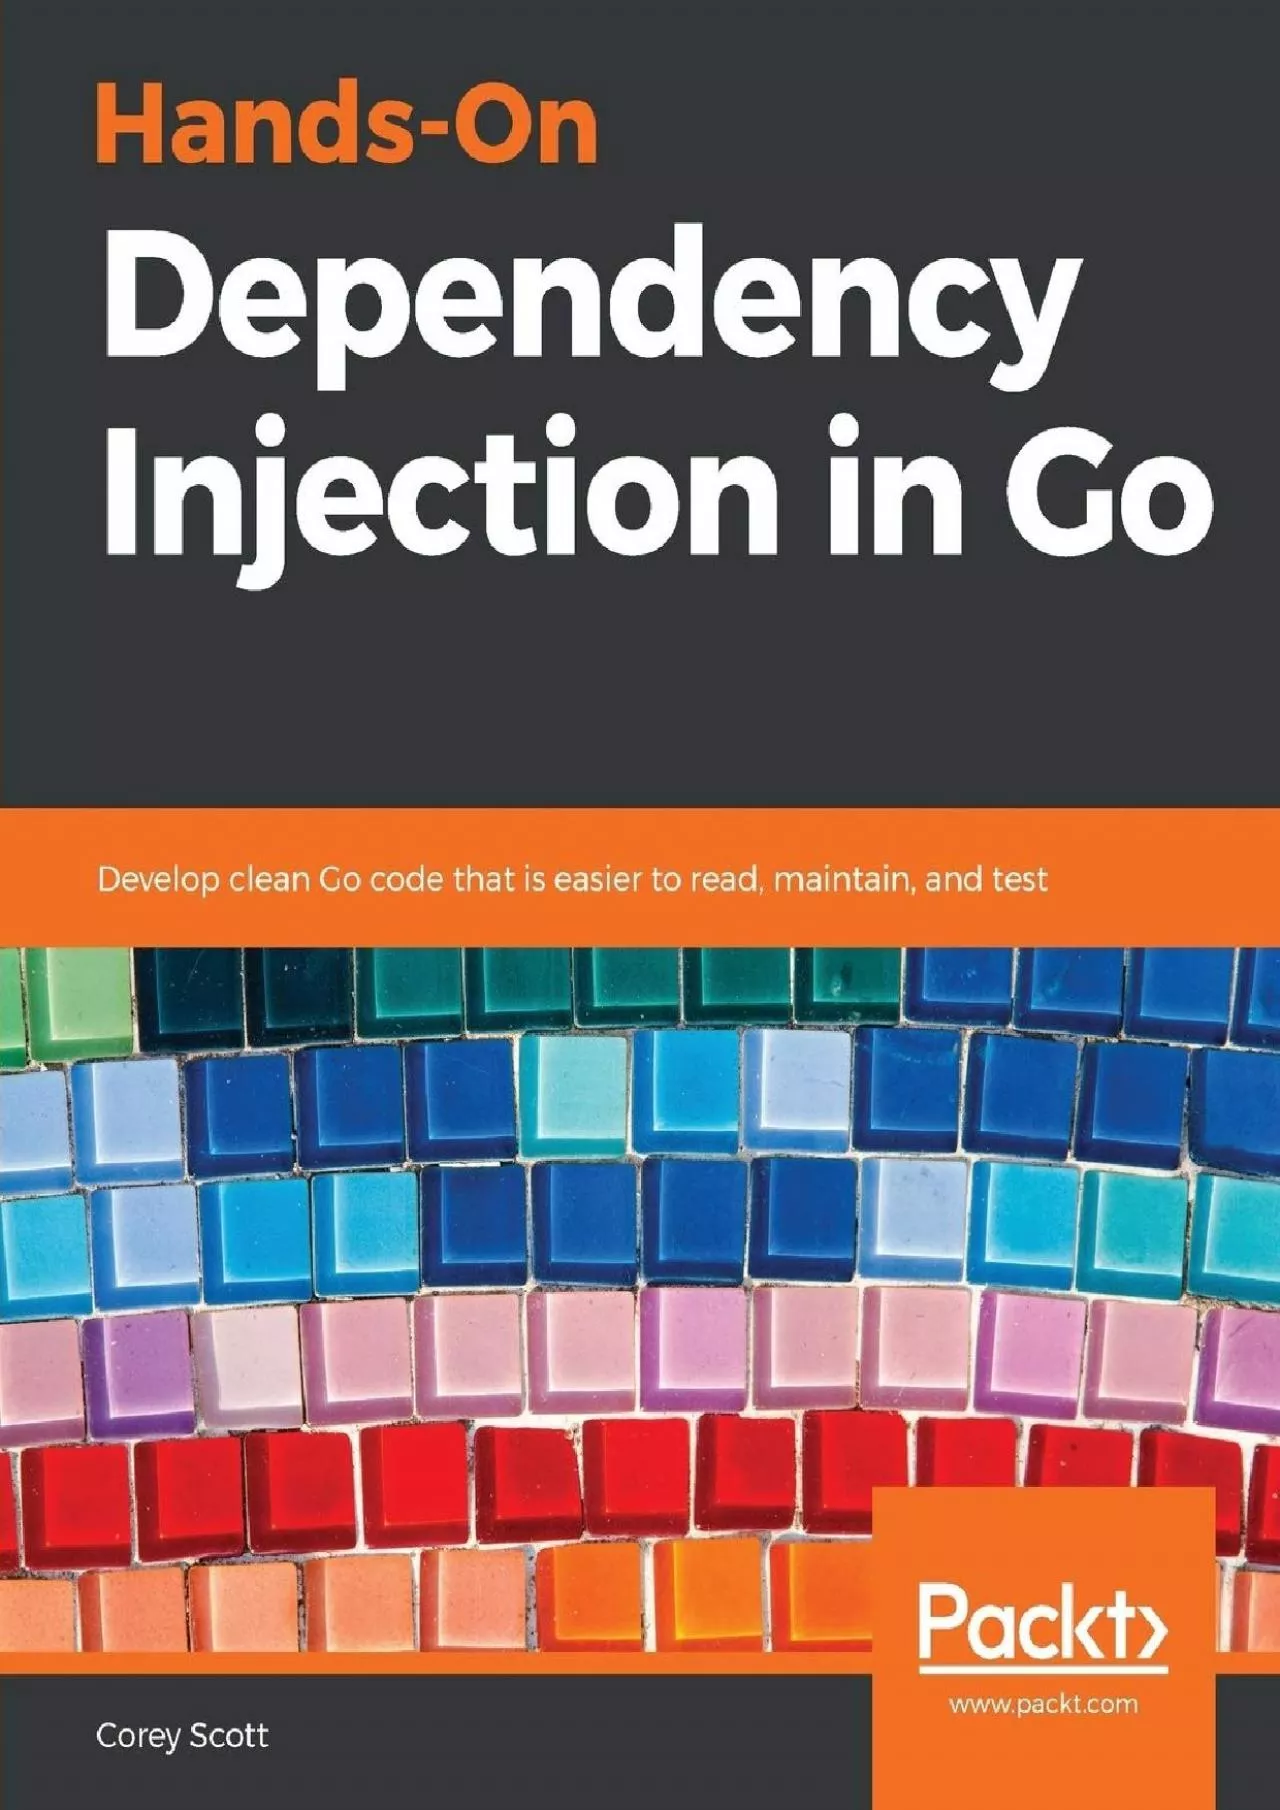 [FREE]-Hands-On Dependency Injection in Go: Develop clean Go code that is easier to read,